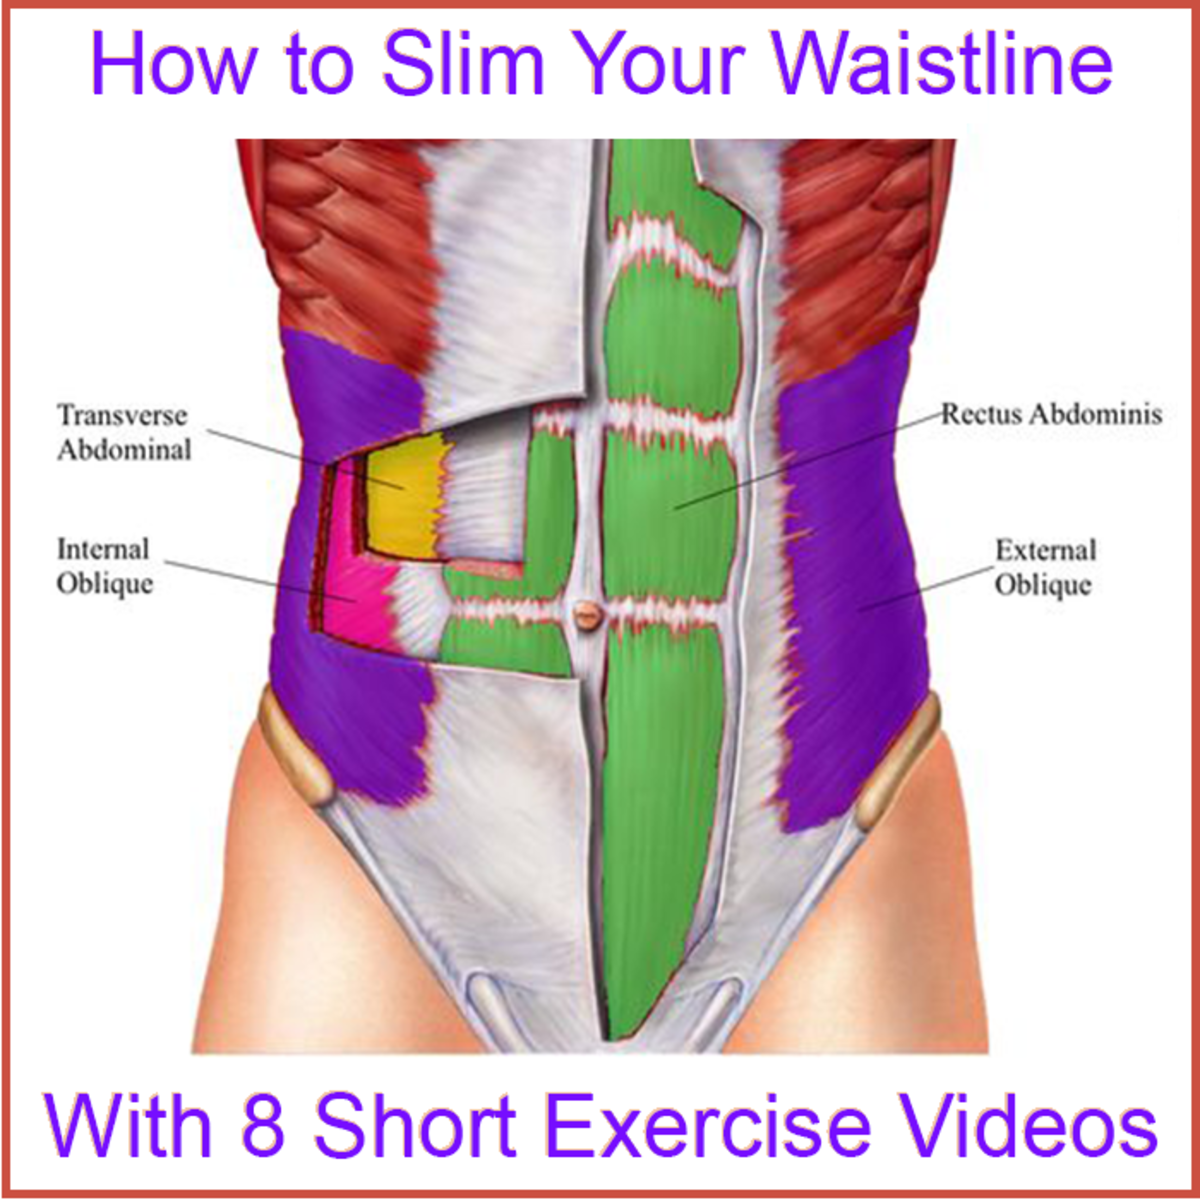 How to Slim Your Waistline With 8 Short Exercise Videos